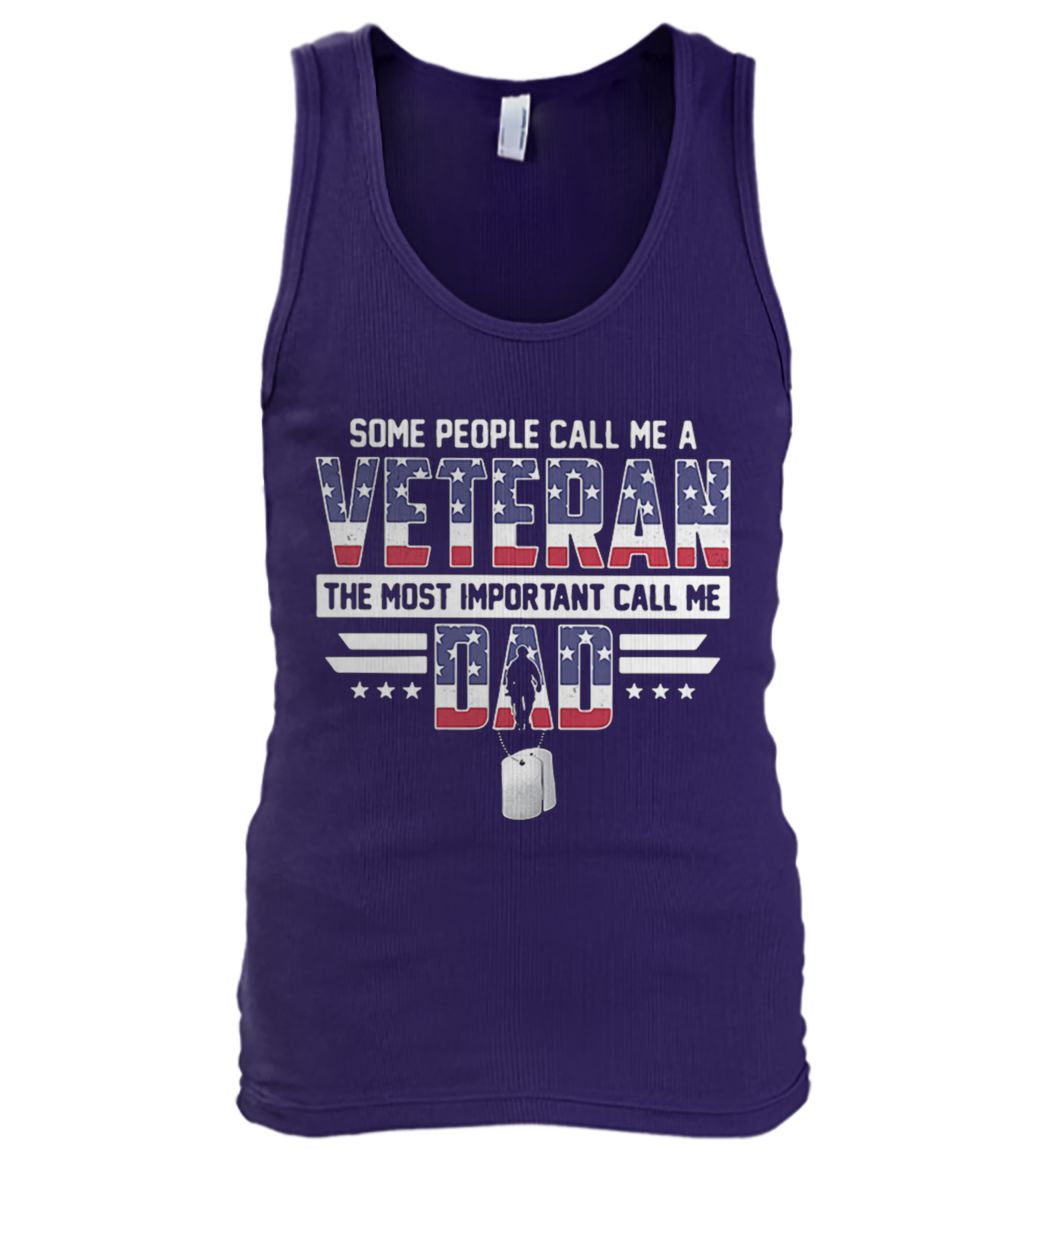 Some people call me a veteran the most important call me dad men's tank top